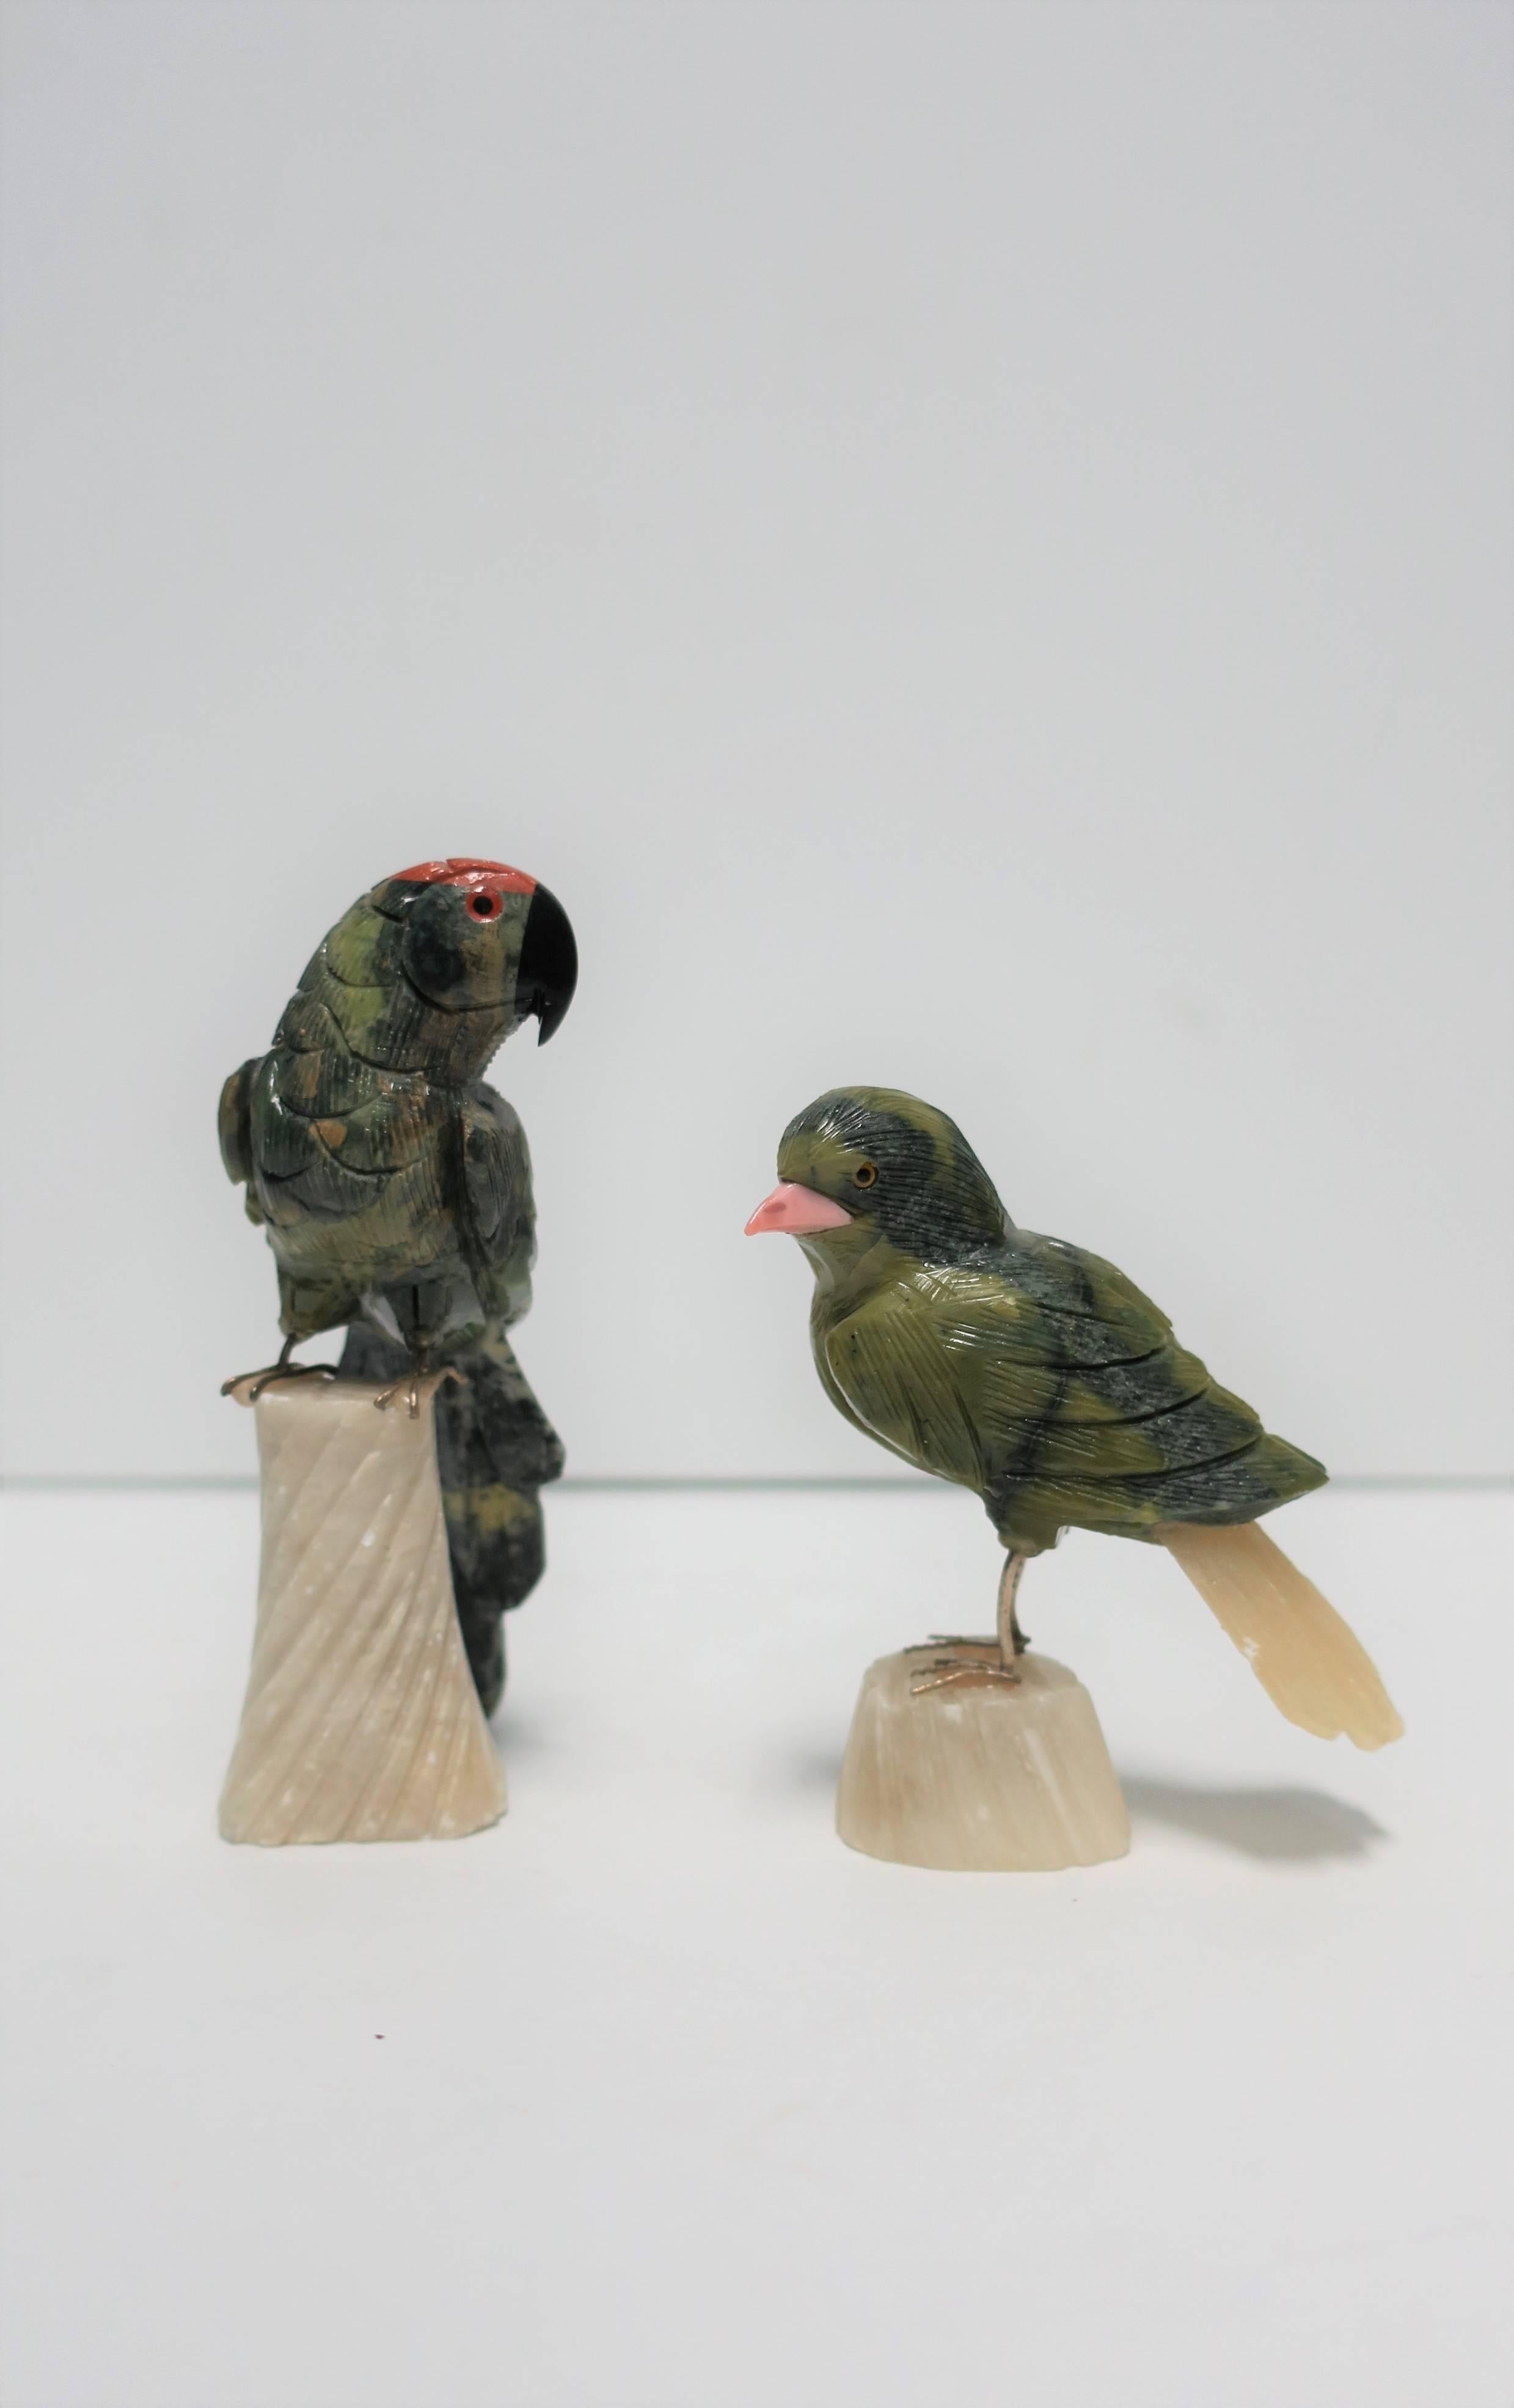 A beautiful vintage set of green and multicolored marble, alabaster and stone bird sculptures - a parrot and a finch. Birds come with onyx plinth shown in images #4 and 5, 9-11. Set includes three pieces. Measurements include: 

Parrot: 1.75 in. W x